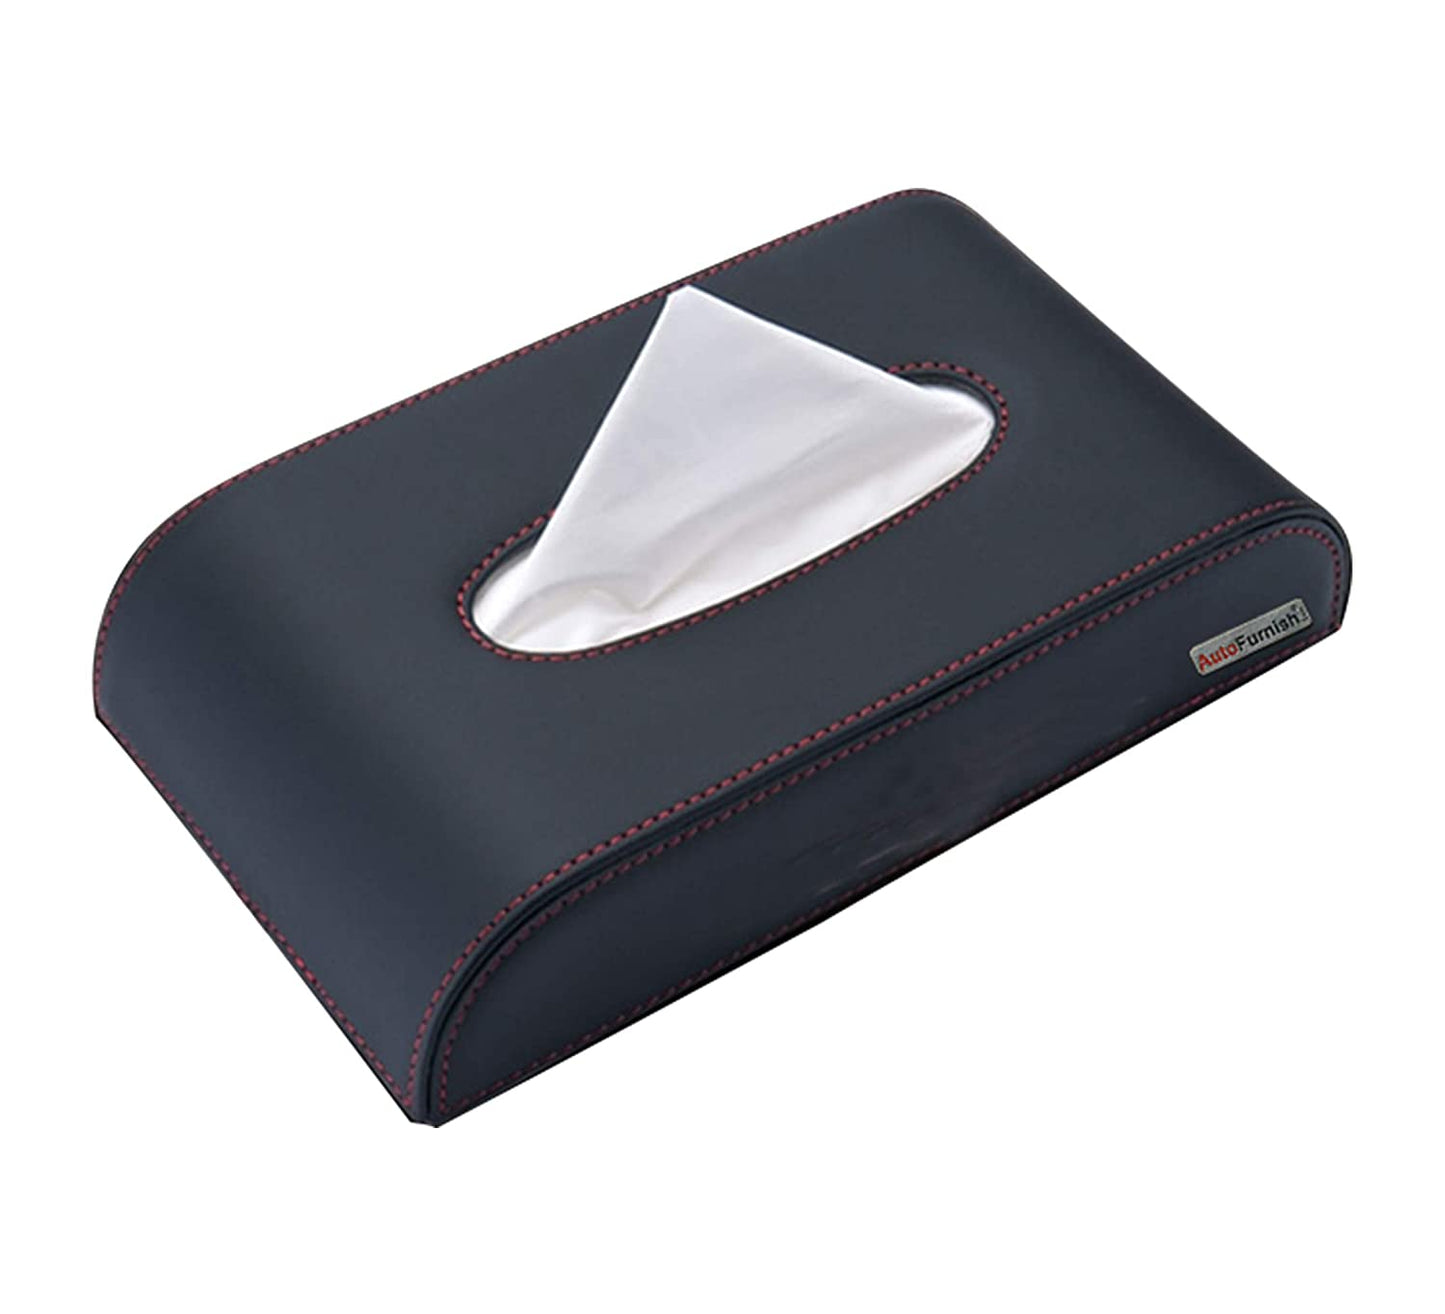 SOFTPICK Tissue Box | Water Resistant PU Leather With Strong Wooden Frame and 100 Free Tissues